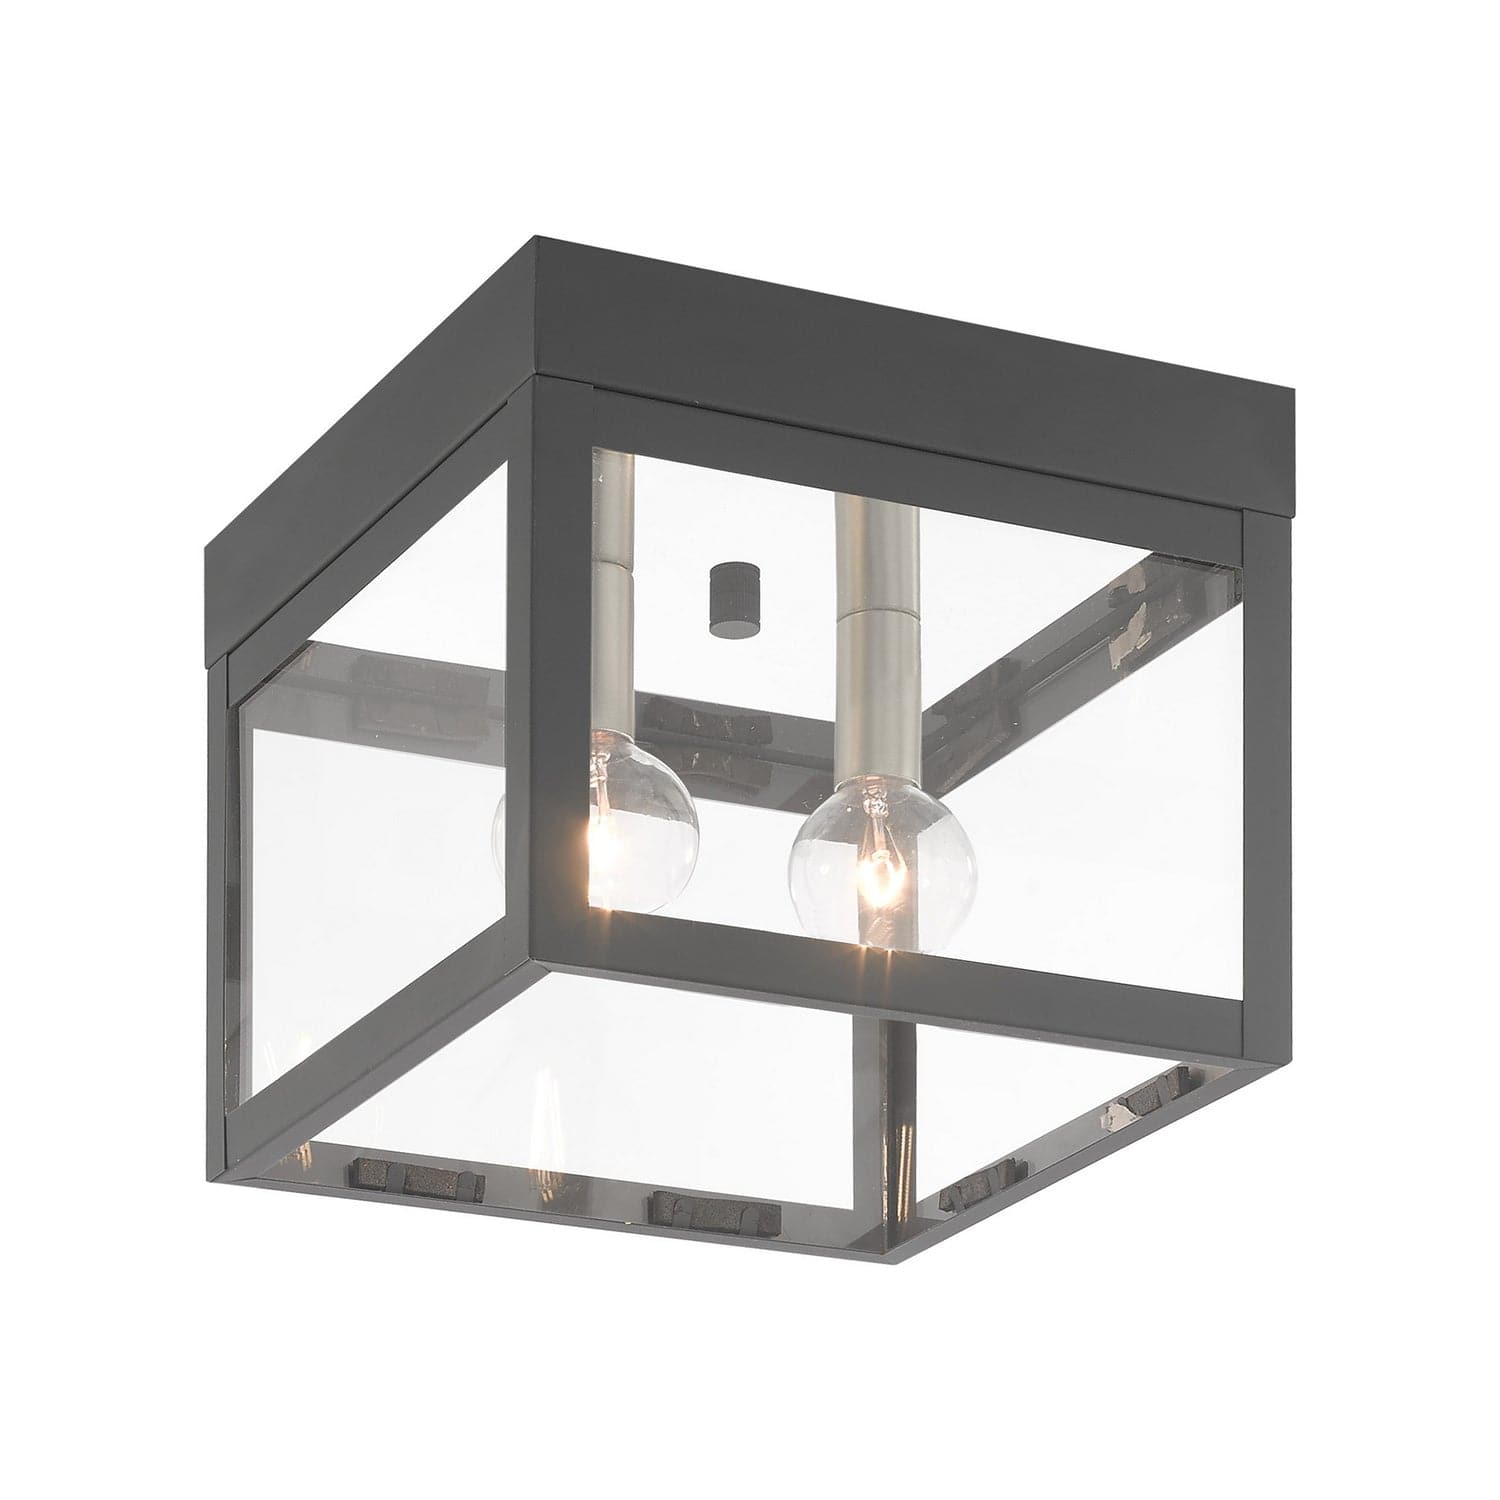 Livex Lighting - 20588-76 - Two Light Outdoor Ceiling Mount - Nyack - Scandinavian Gray w/ Brushed Nickels and Polished Chrome Stainless Steel